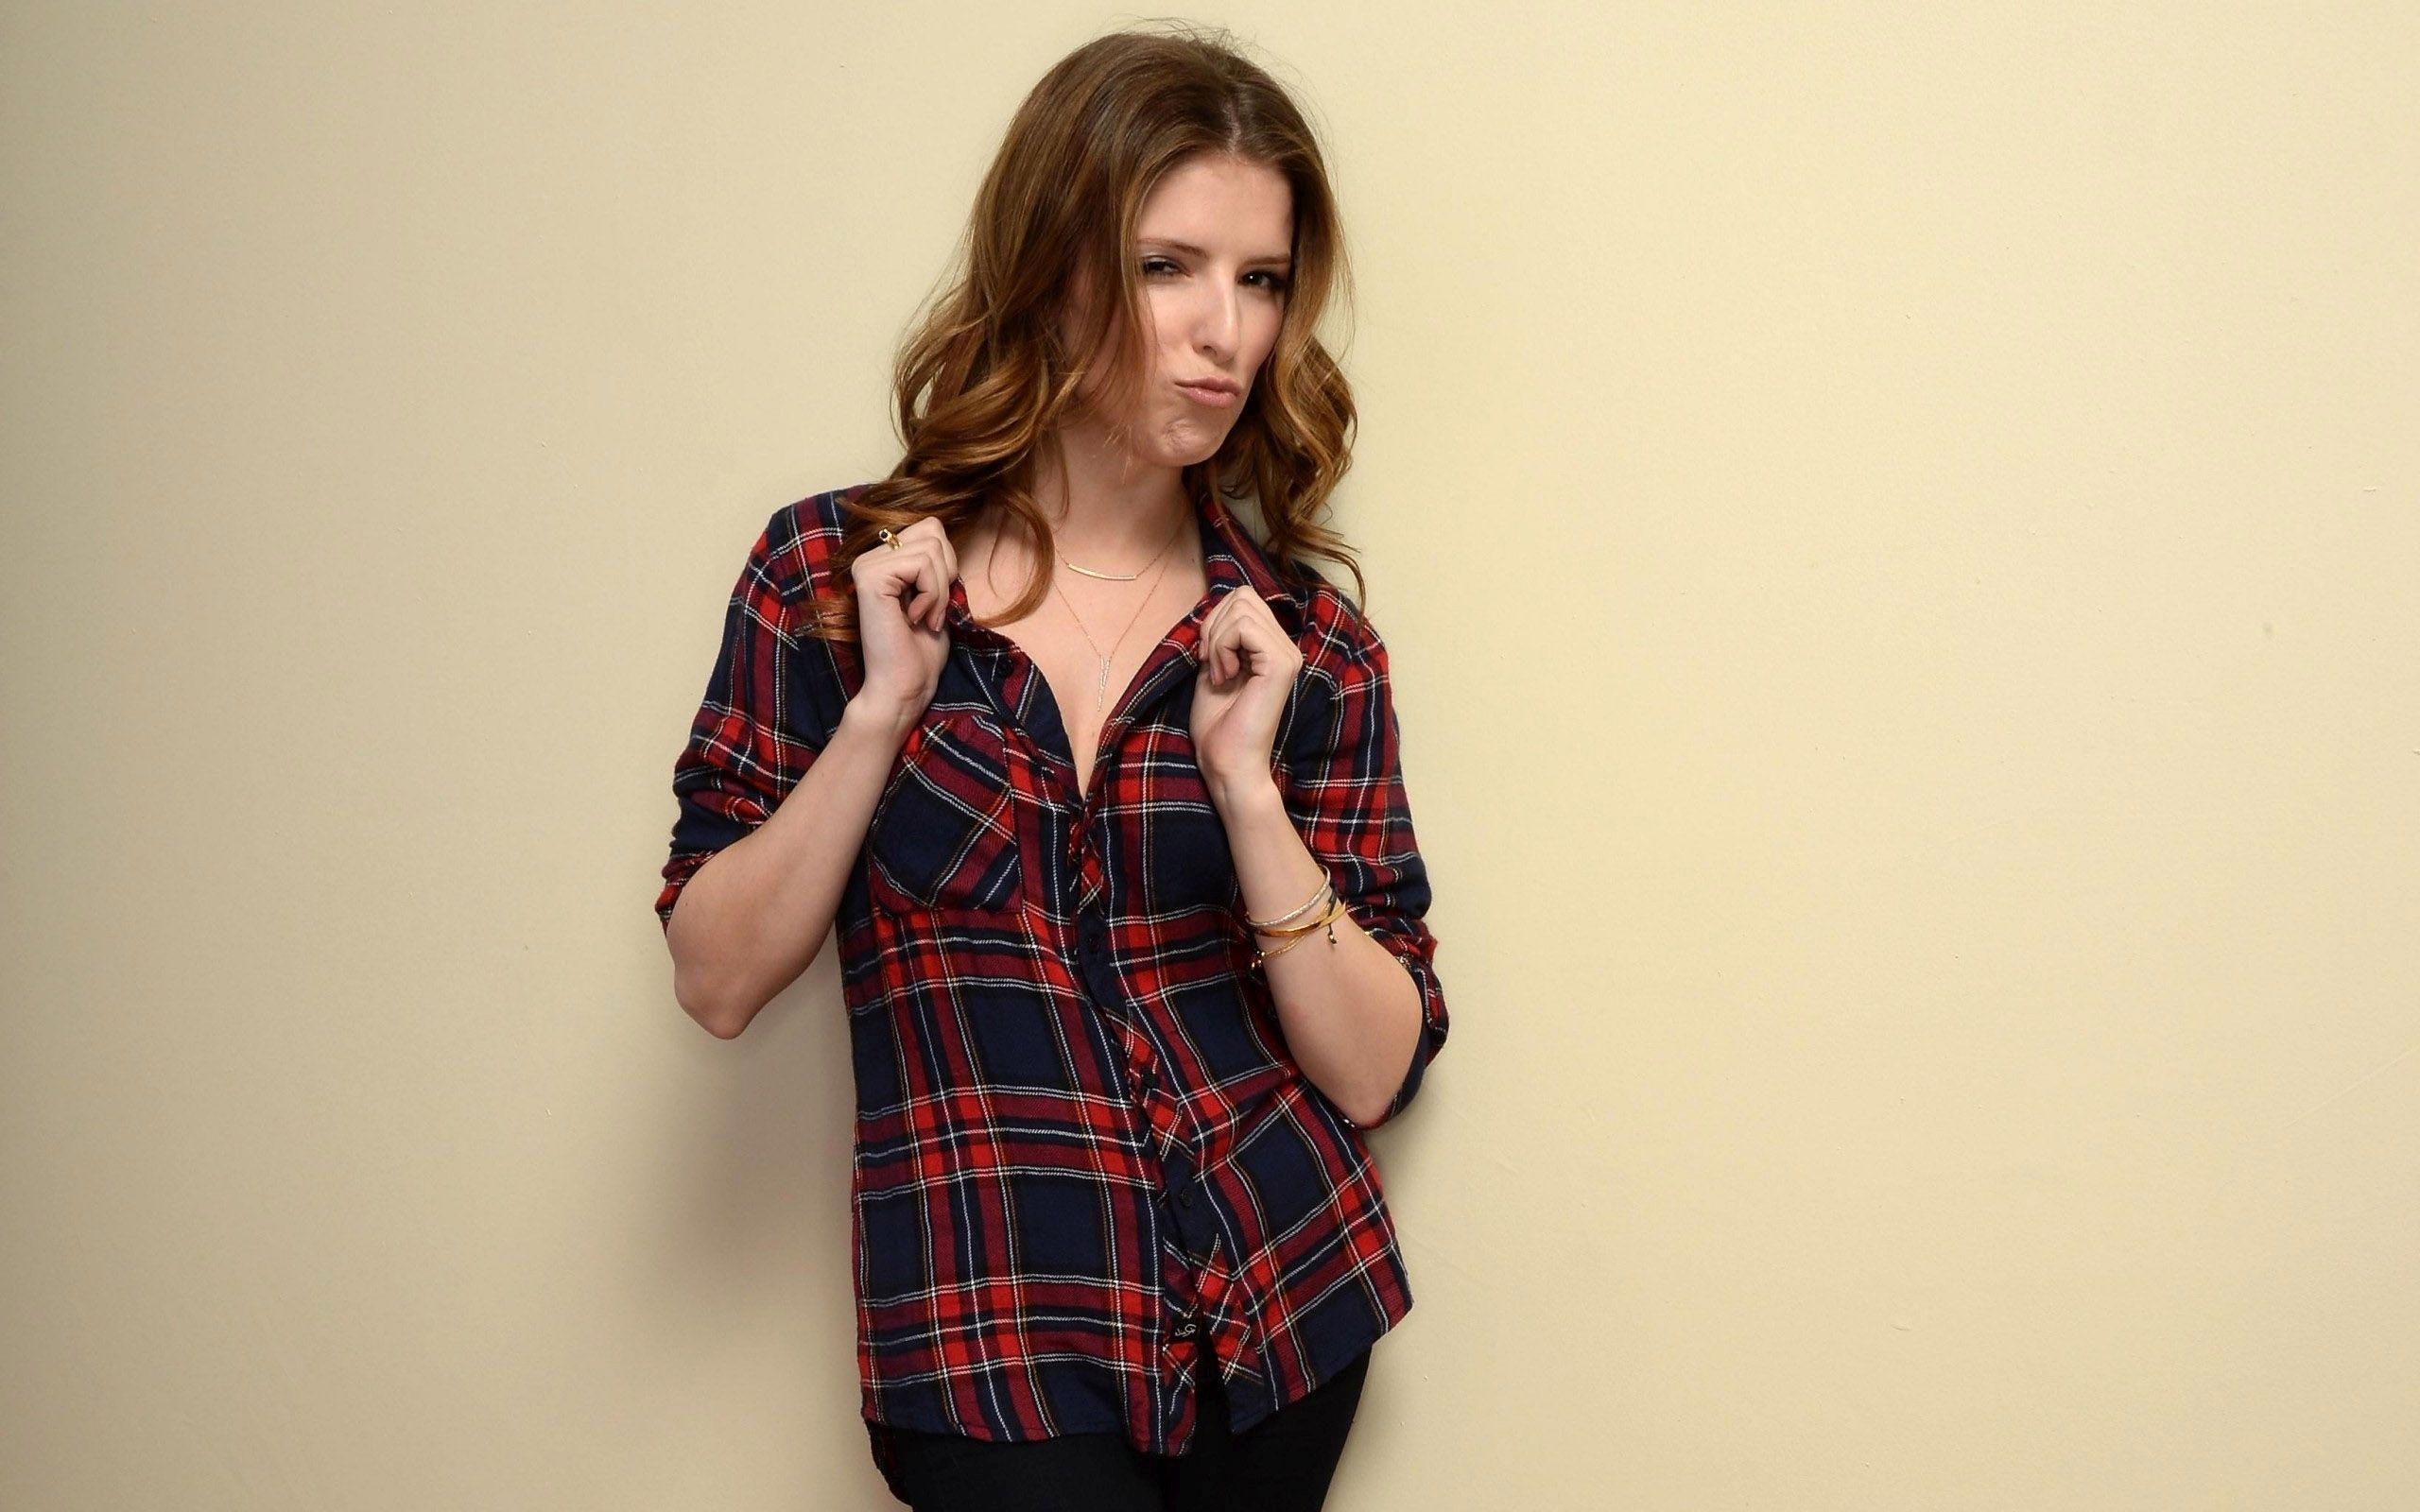 Anna Kendrick Wallpaper High Resolution and Quality Download